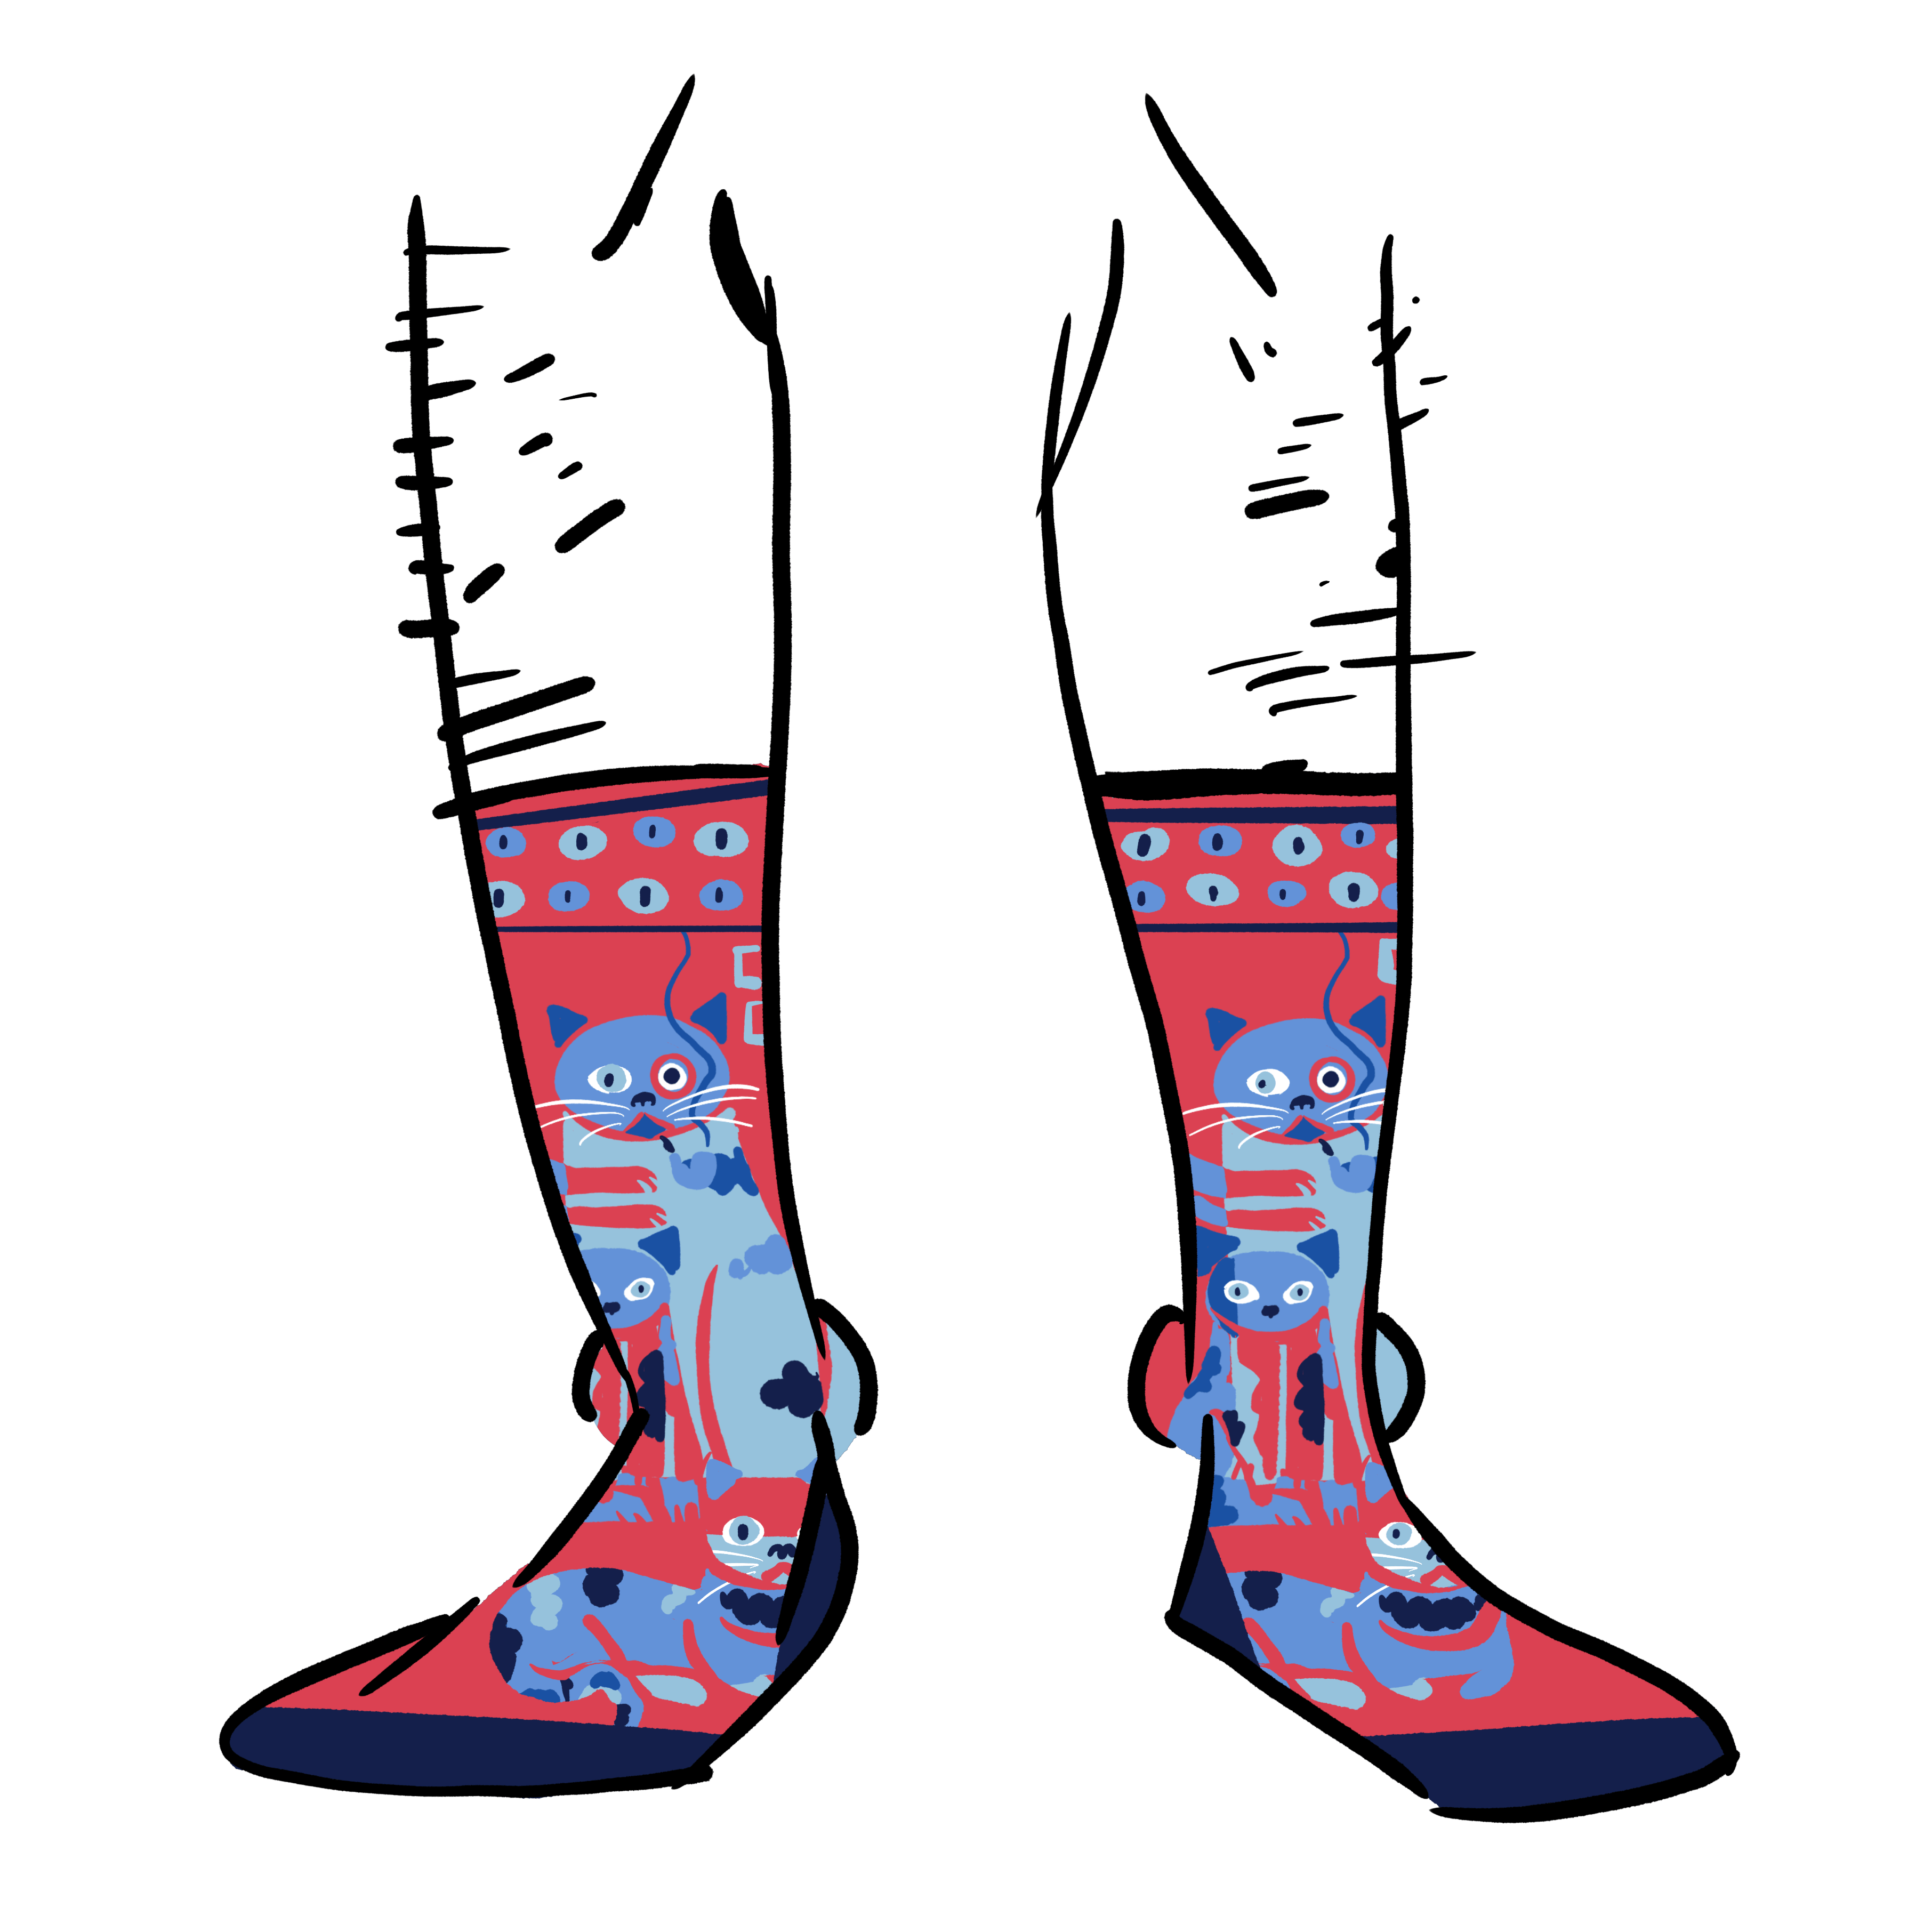 Red socks with abstract drawings of cats on them.